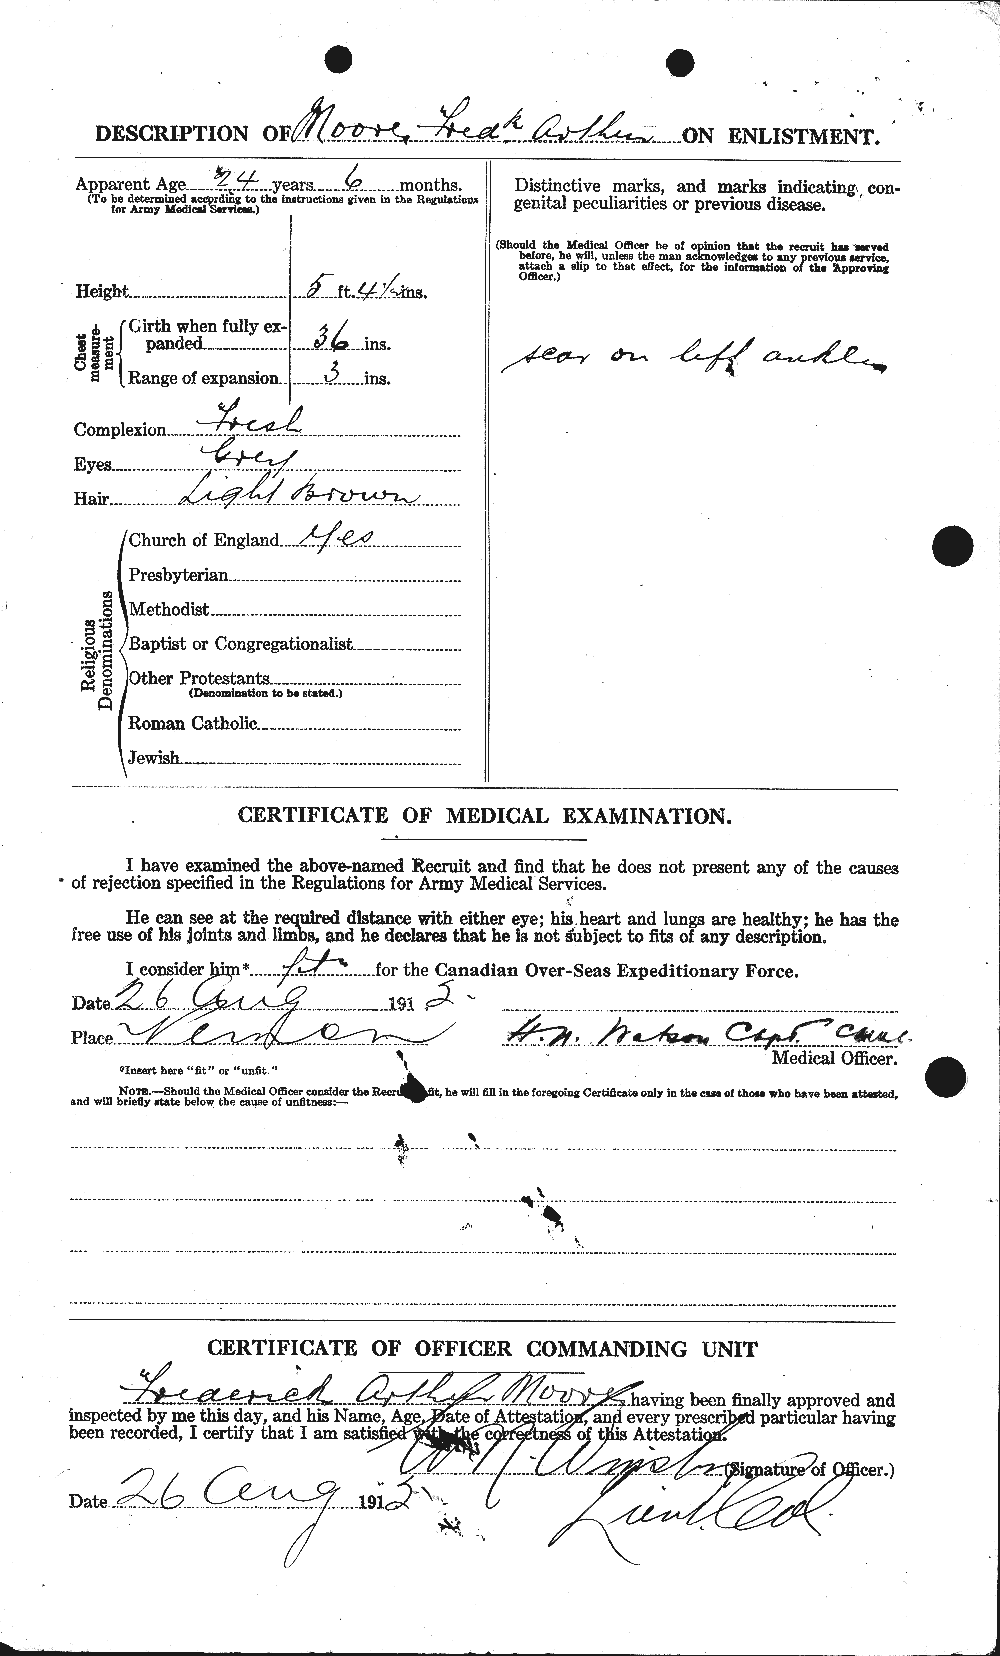 Personnel Records of the First World War - CEF 506445b